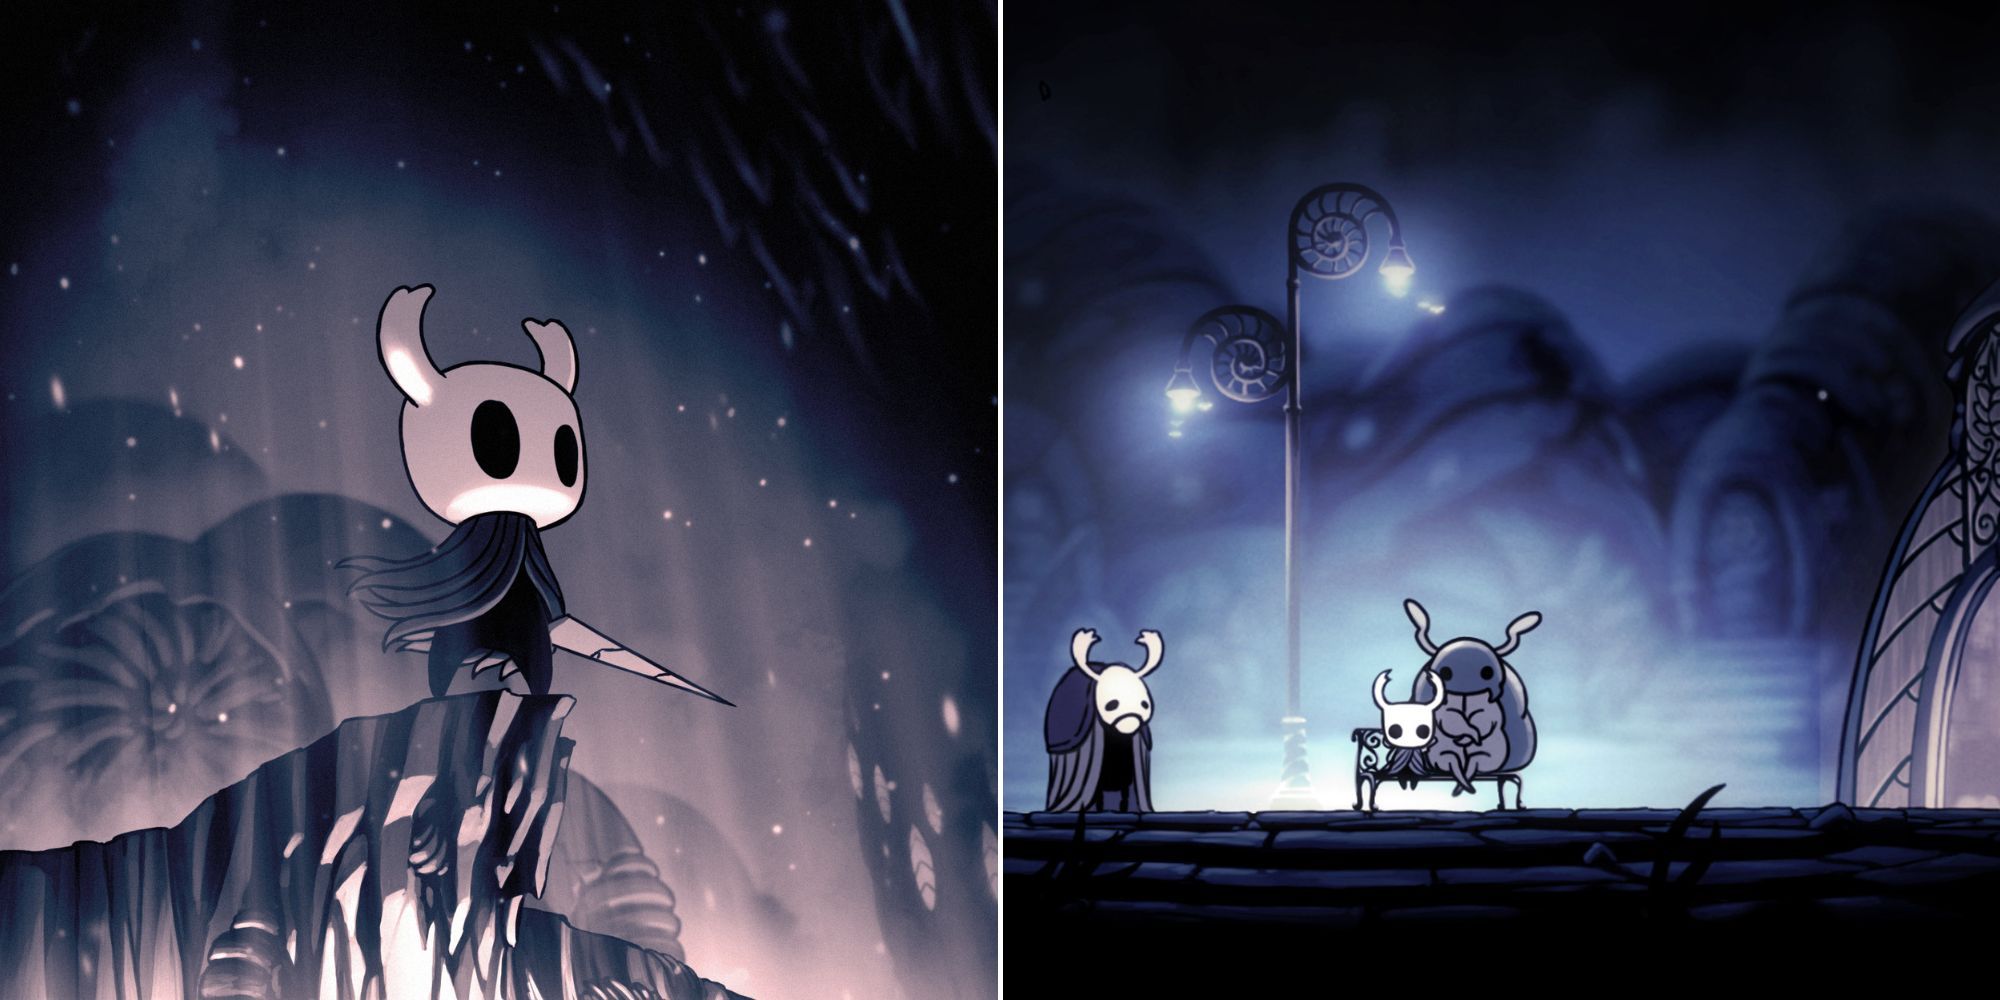 Hollow Knight Cover Art - Starting Area